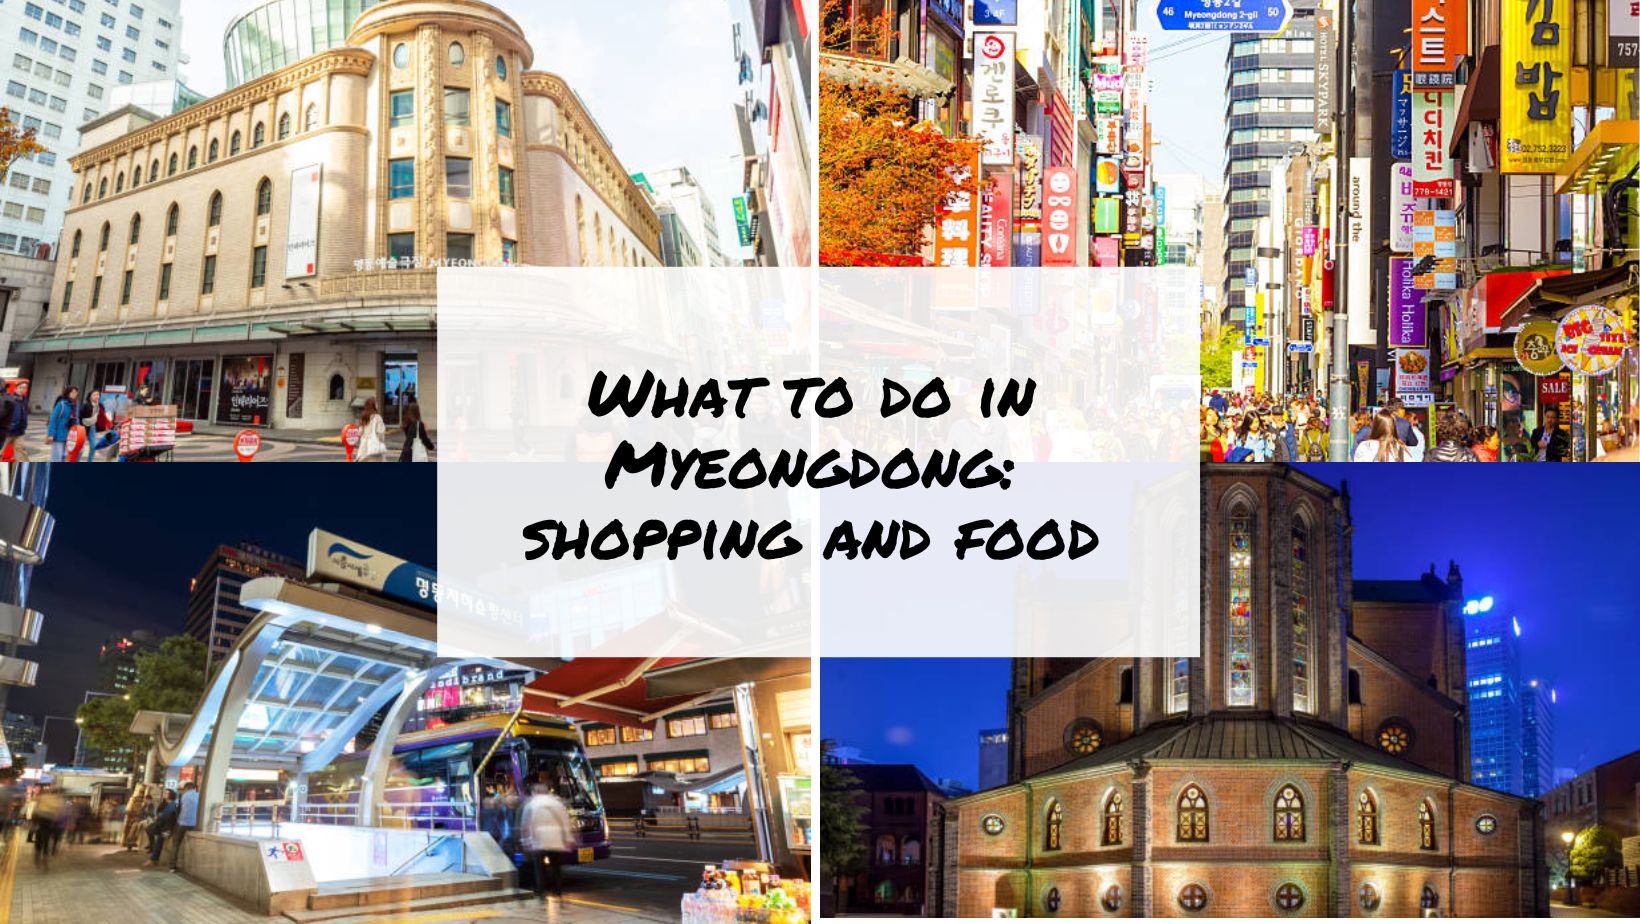 What to do in Myeongdong shopping and food